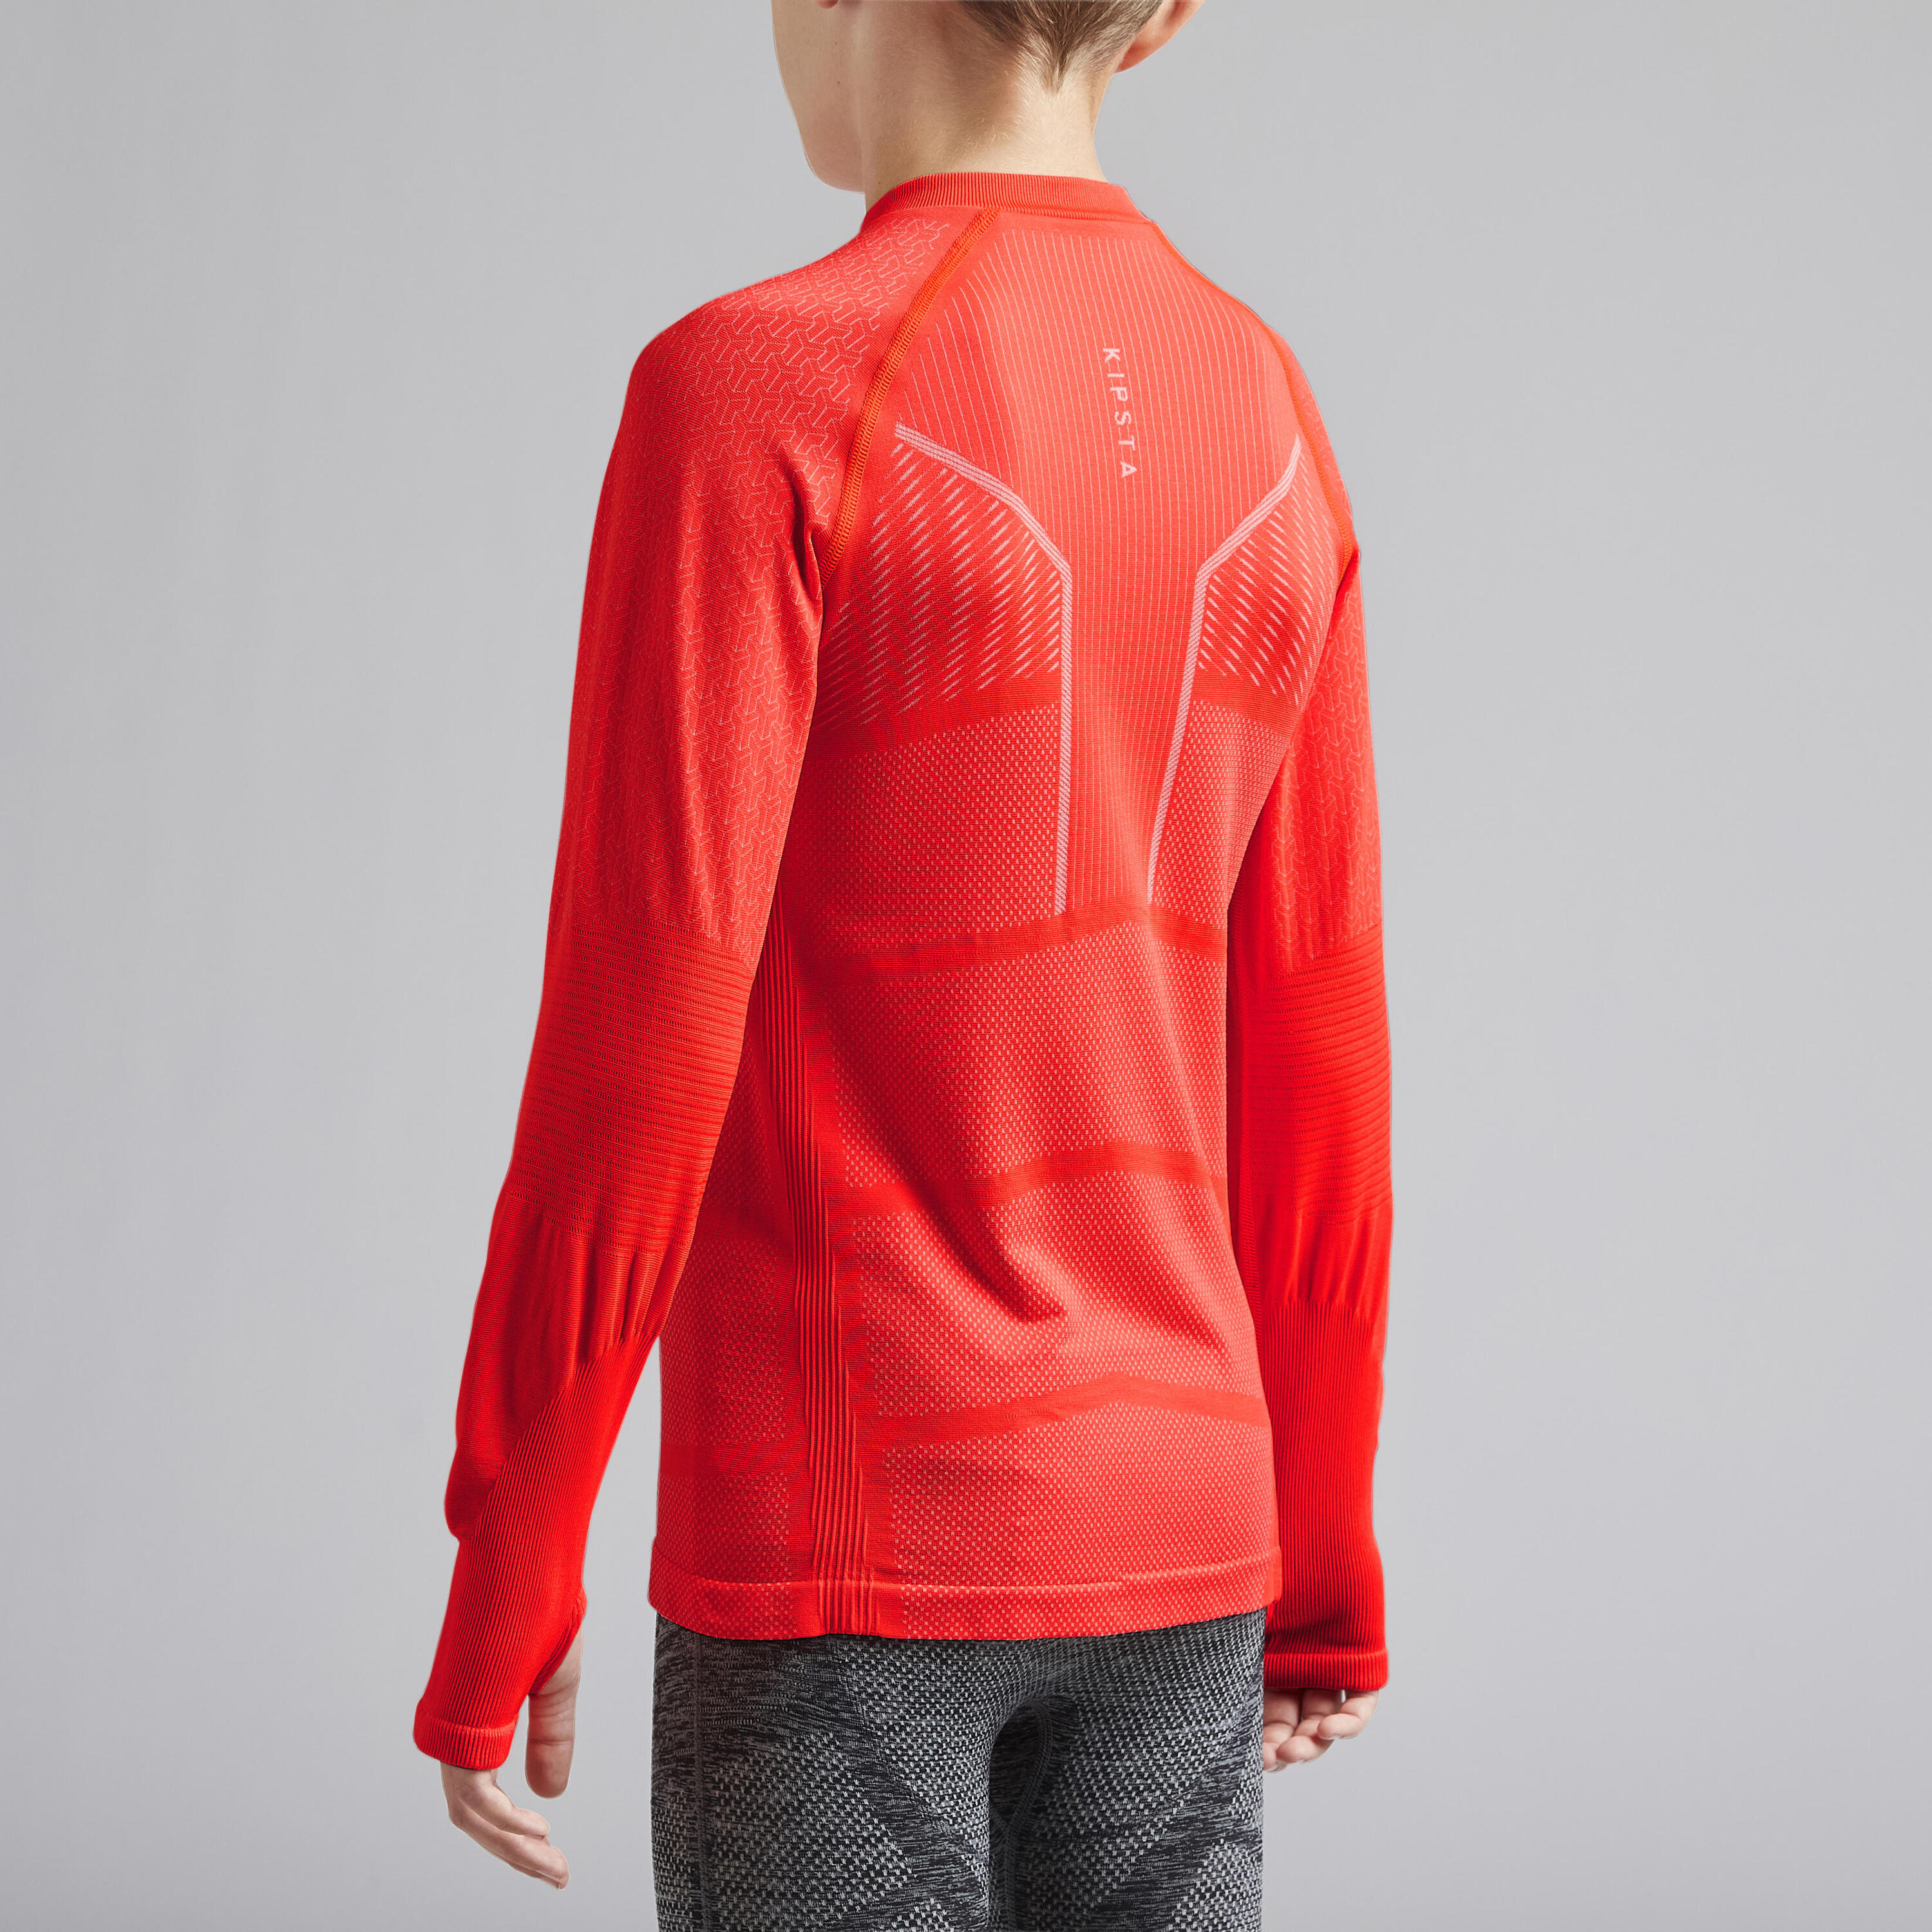 Kids' Long-Sleeved Football Base Layer Top Keepdry 500 - Red 4/9